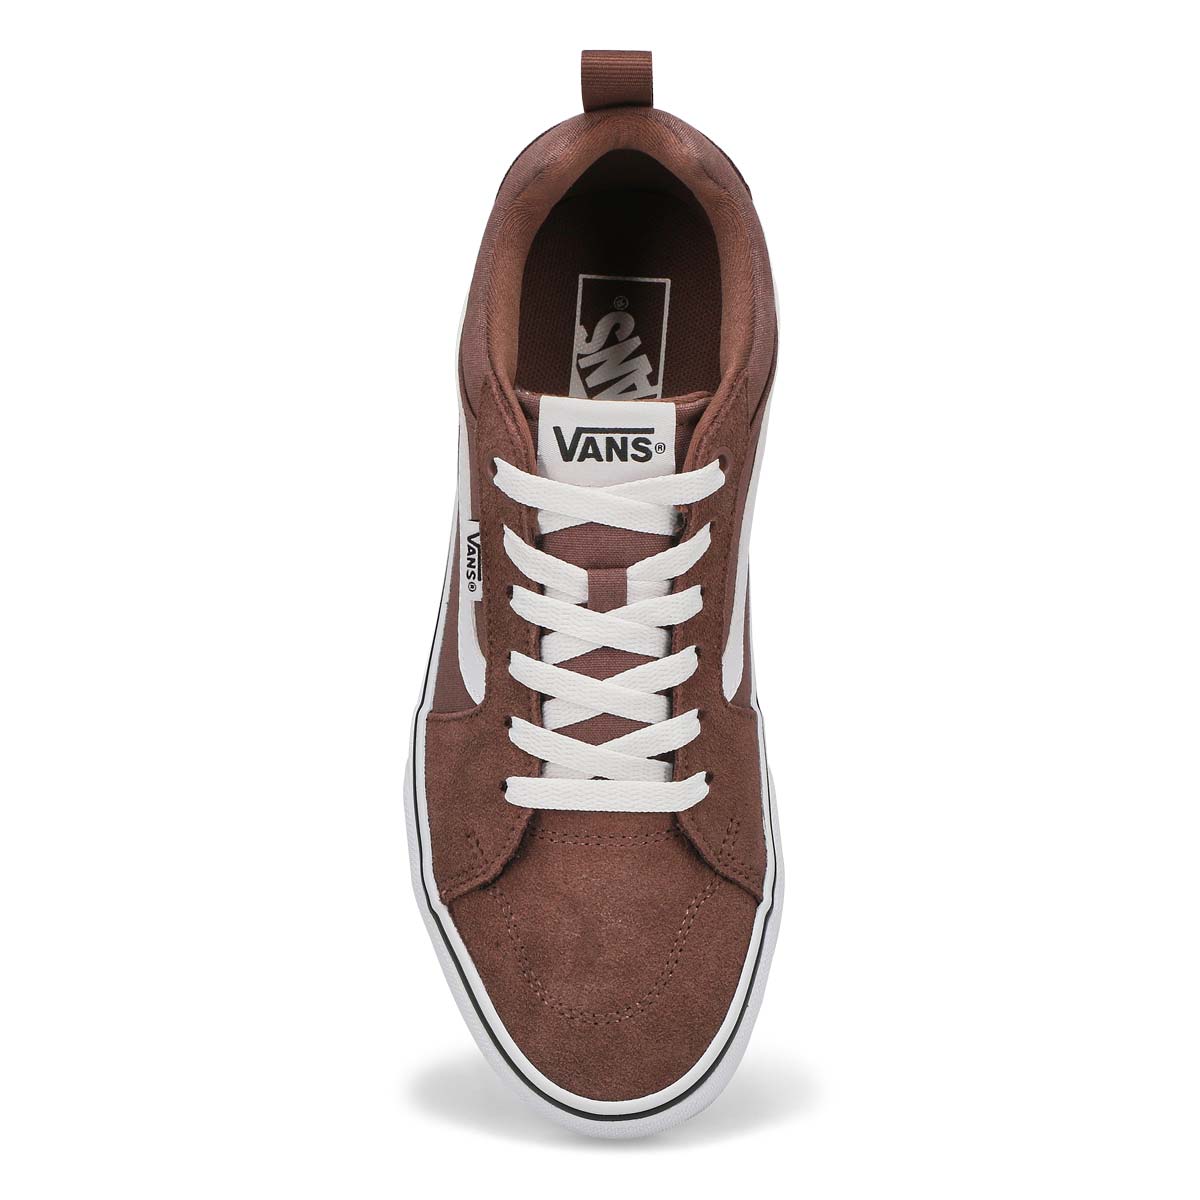 Men's Filmore Lace Up Sneaker - Taupe/White